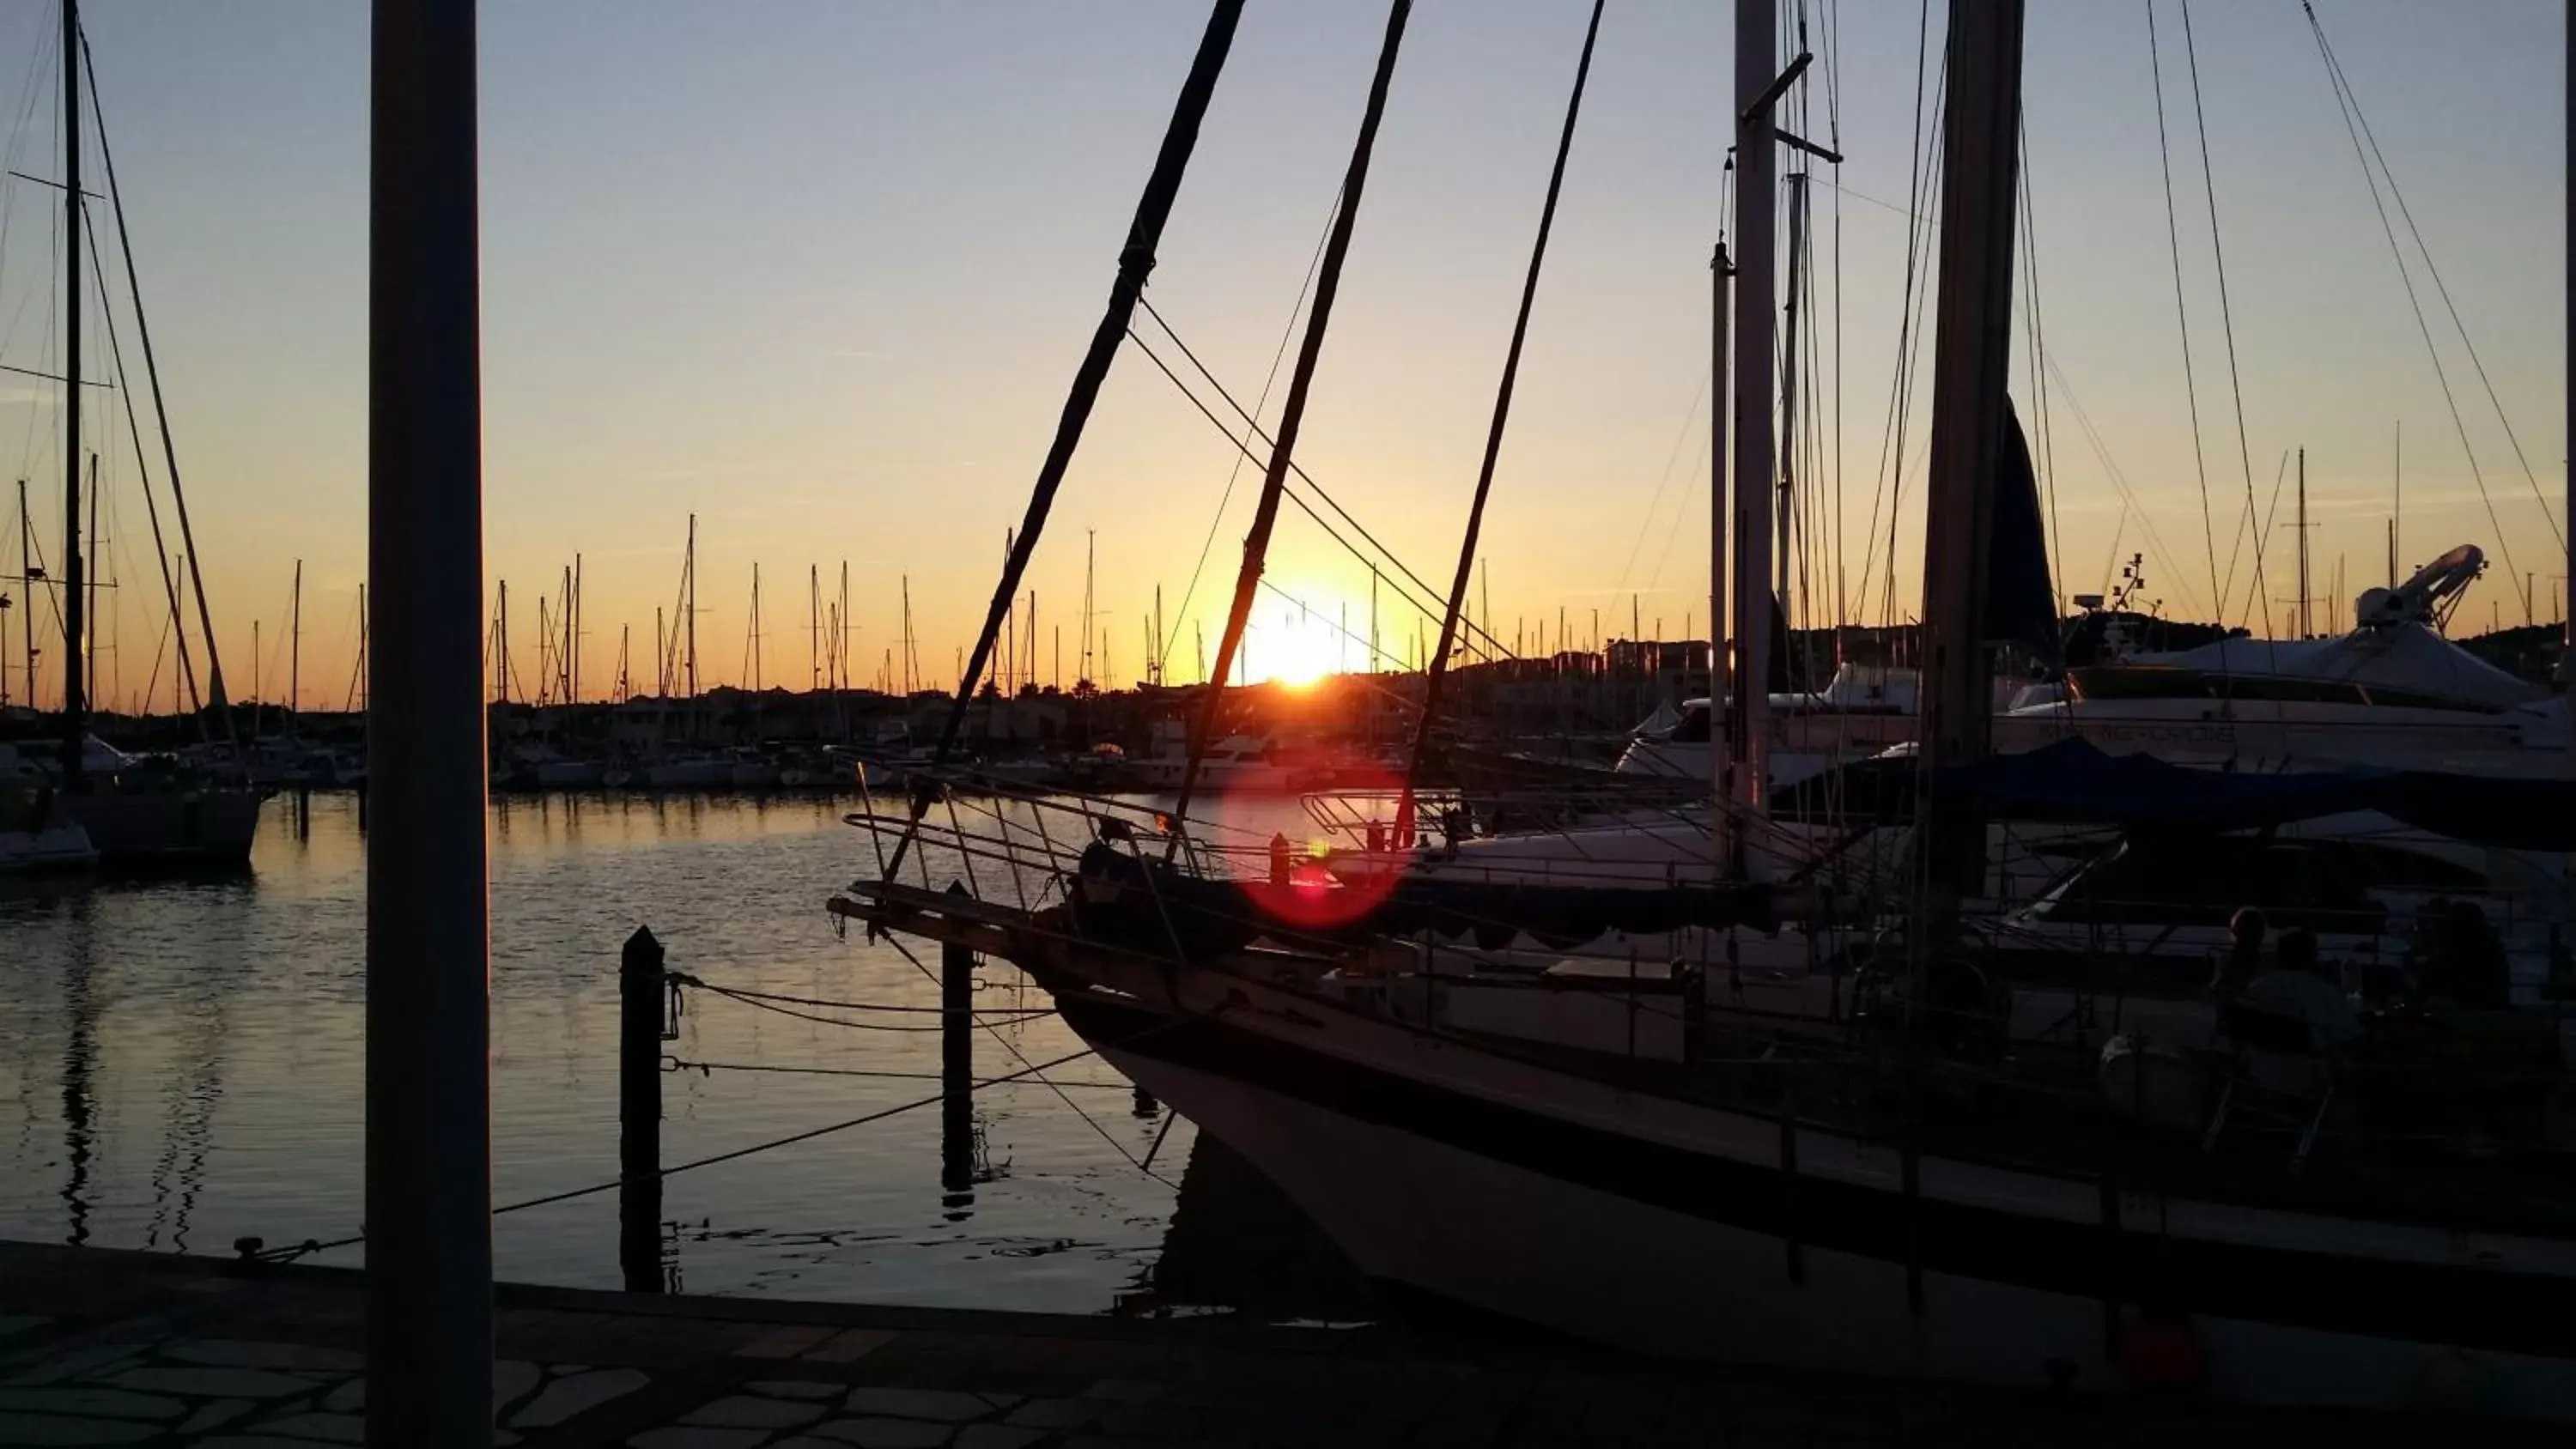 Area and facilities, Sunrise/Sunset in La Voile D' Or